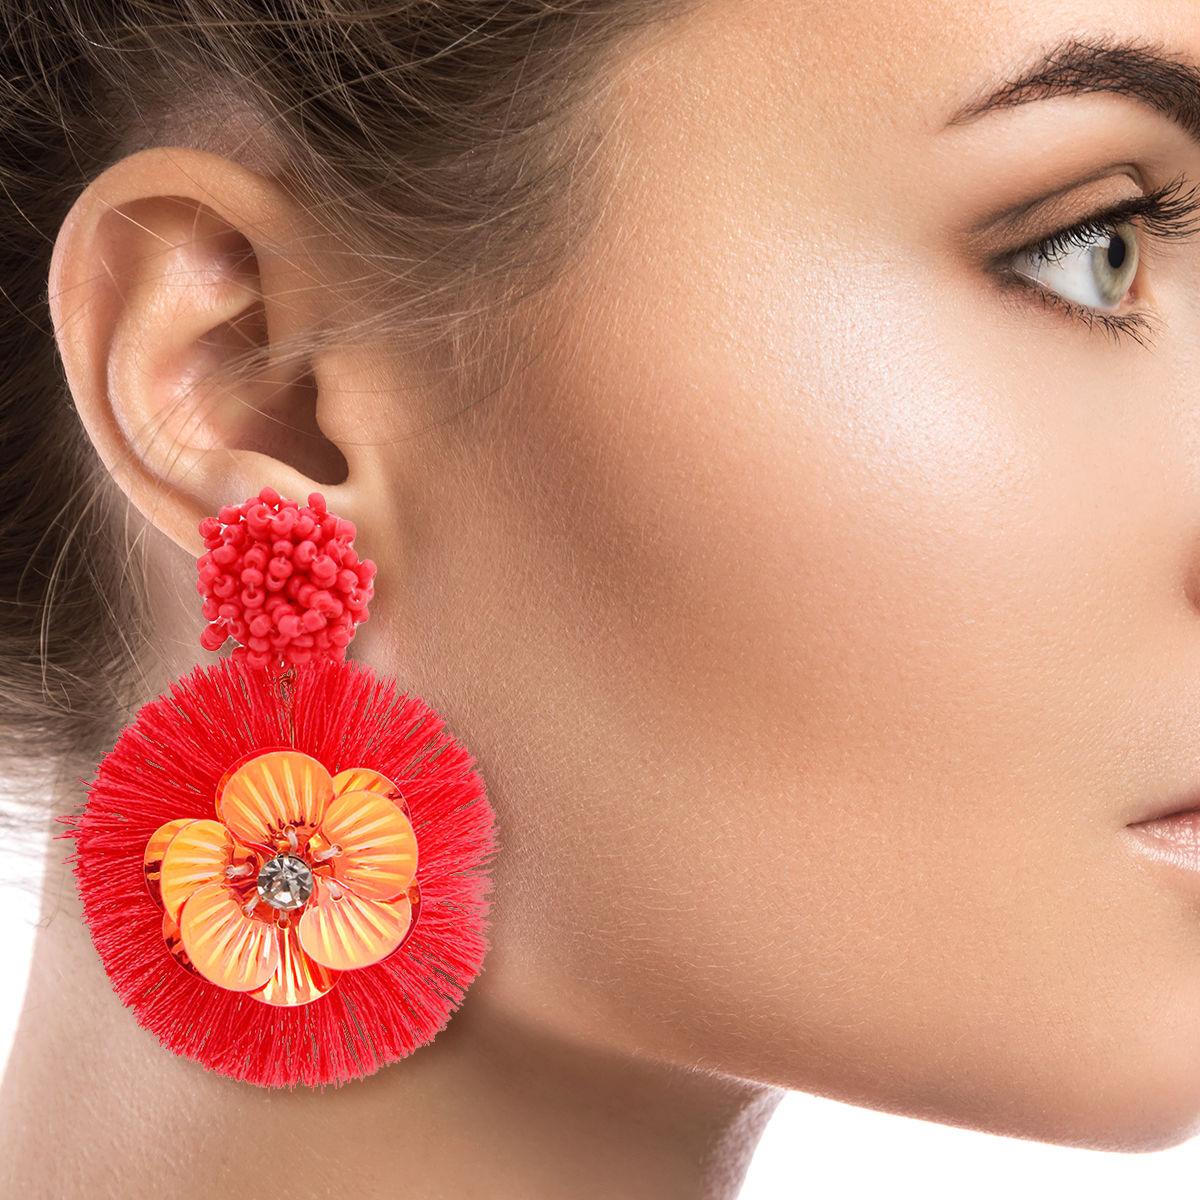 Coral Candy Flower Earrings - Spring Style Blooms in Chic Fashion